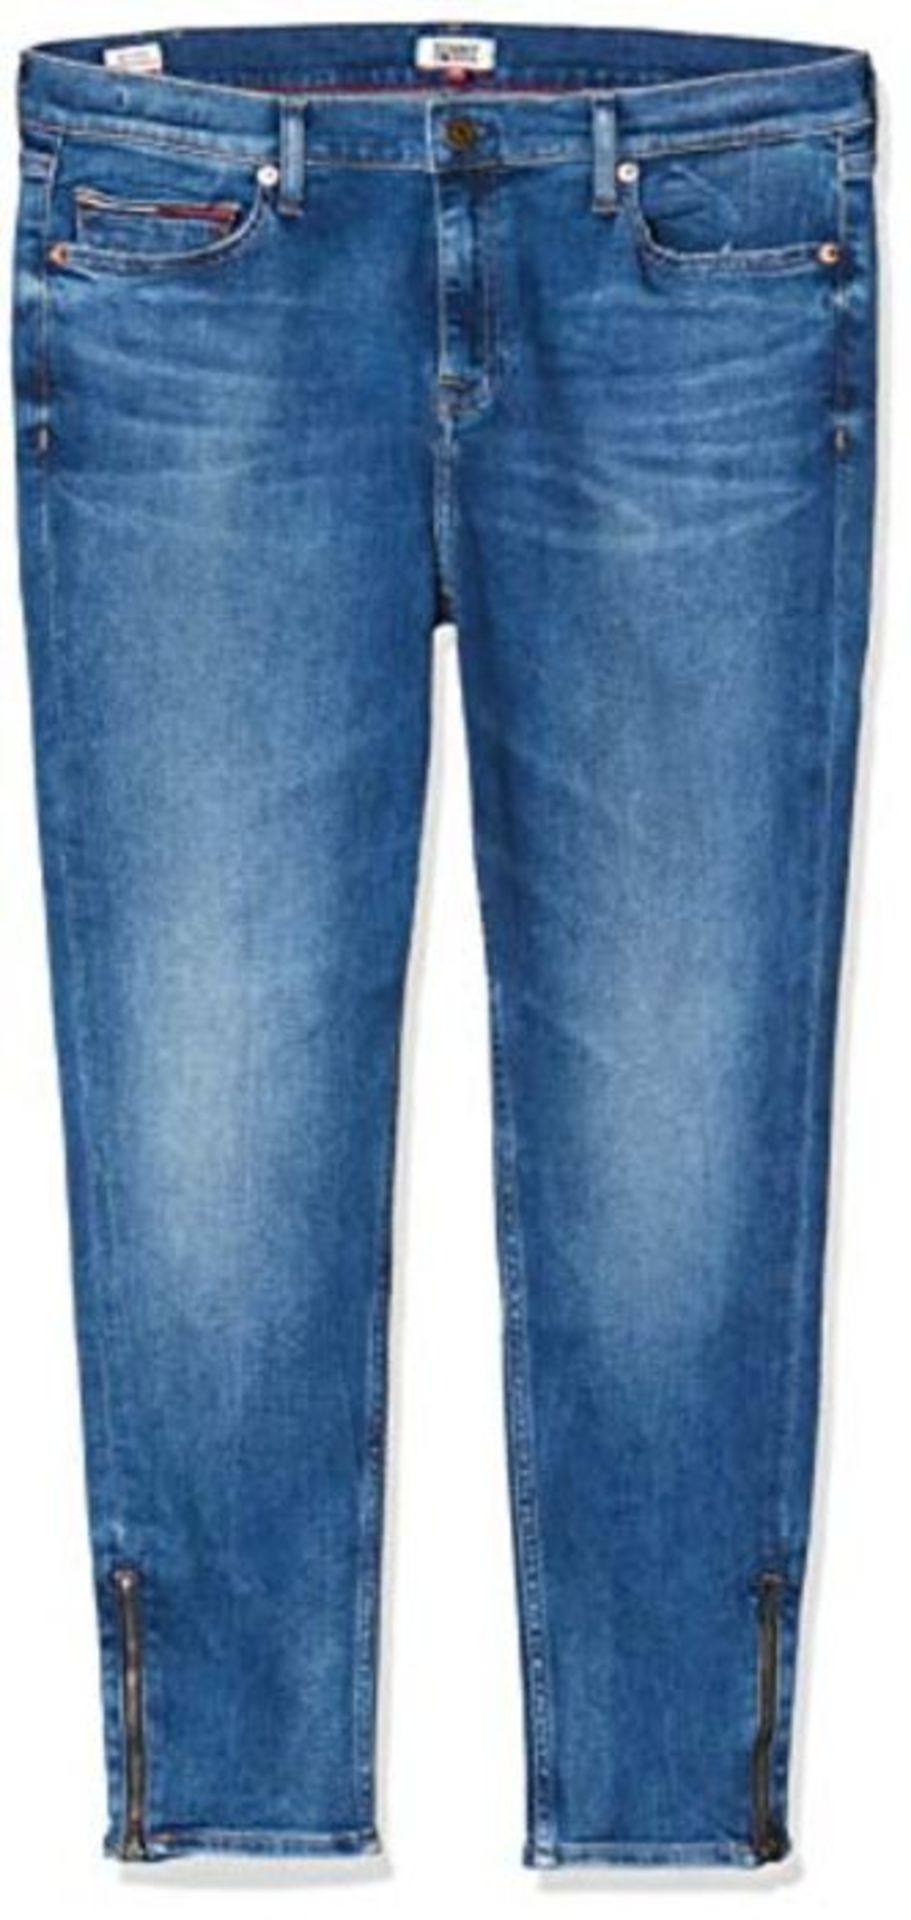 Tommy Jeans Women's Nora Mid Rise Skny Ankl Zip Mnm Straight Jeans, Blue (Denim A), W2